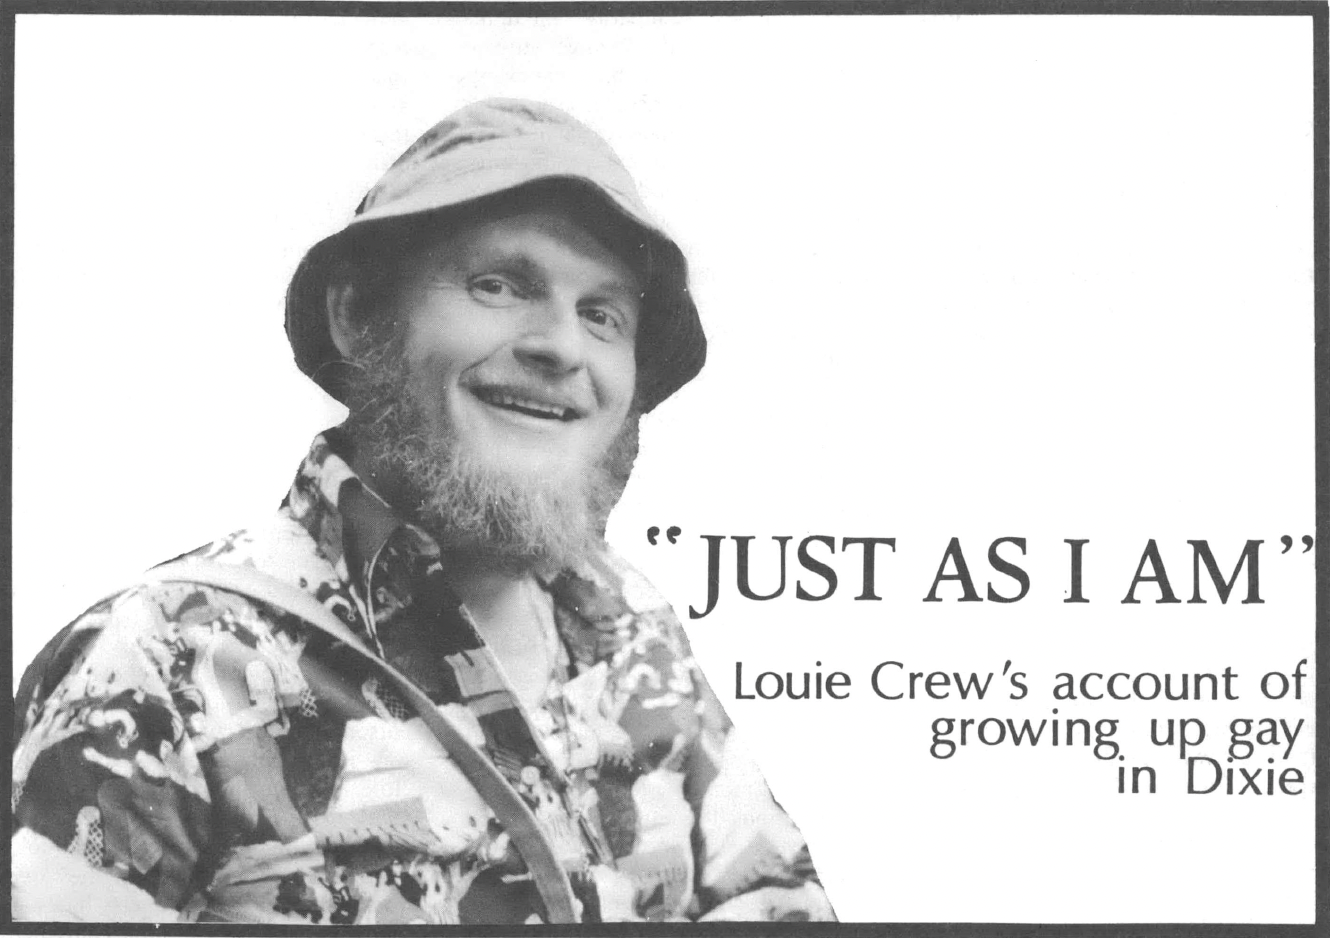 Black and white photo of young white man with beard wearing bucket hat and patterned shirt, smiling at the camera, with title text